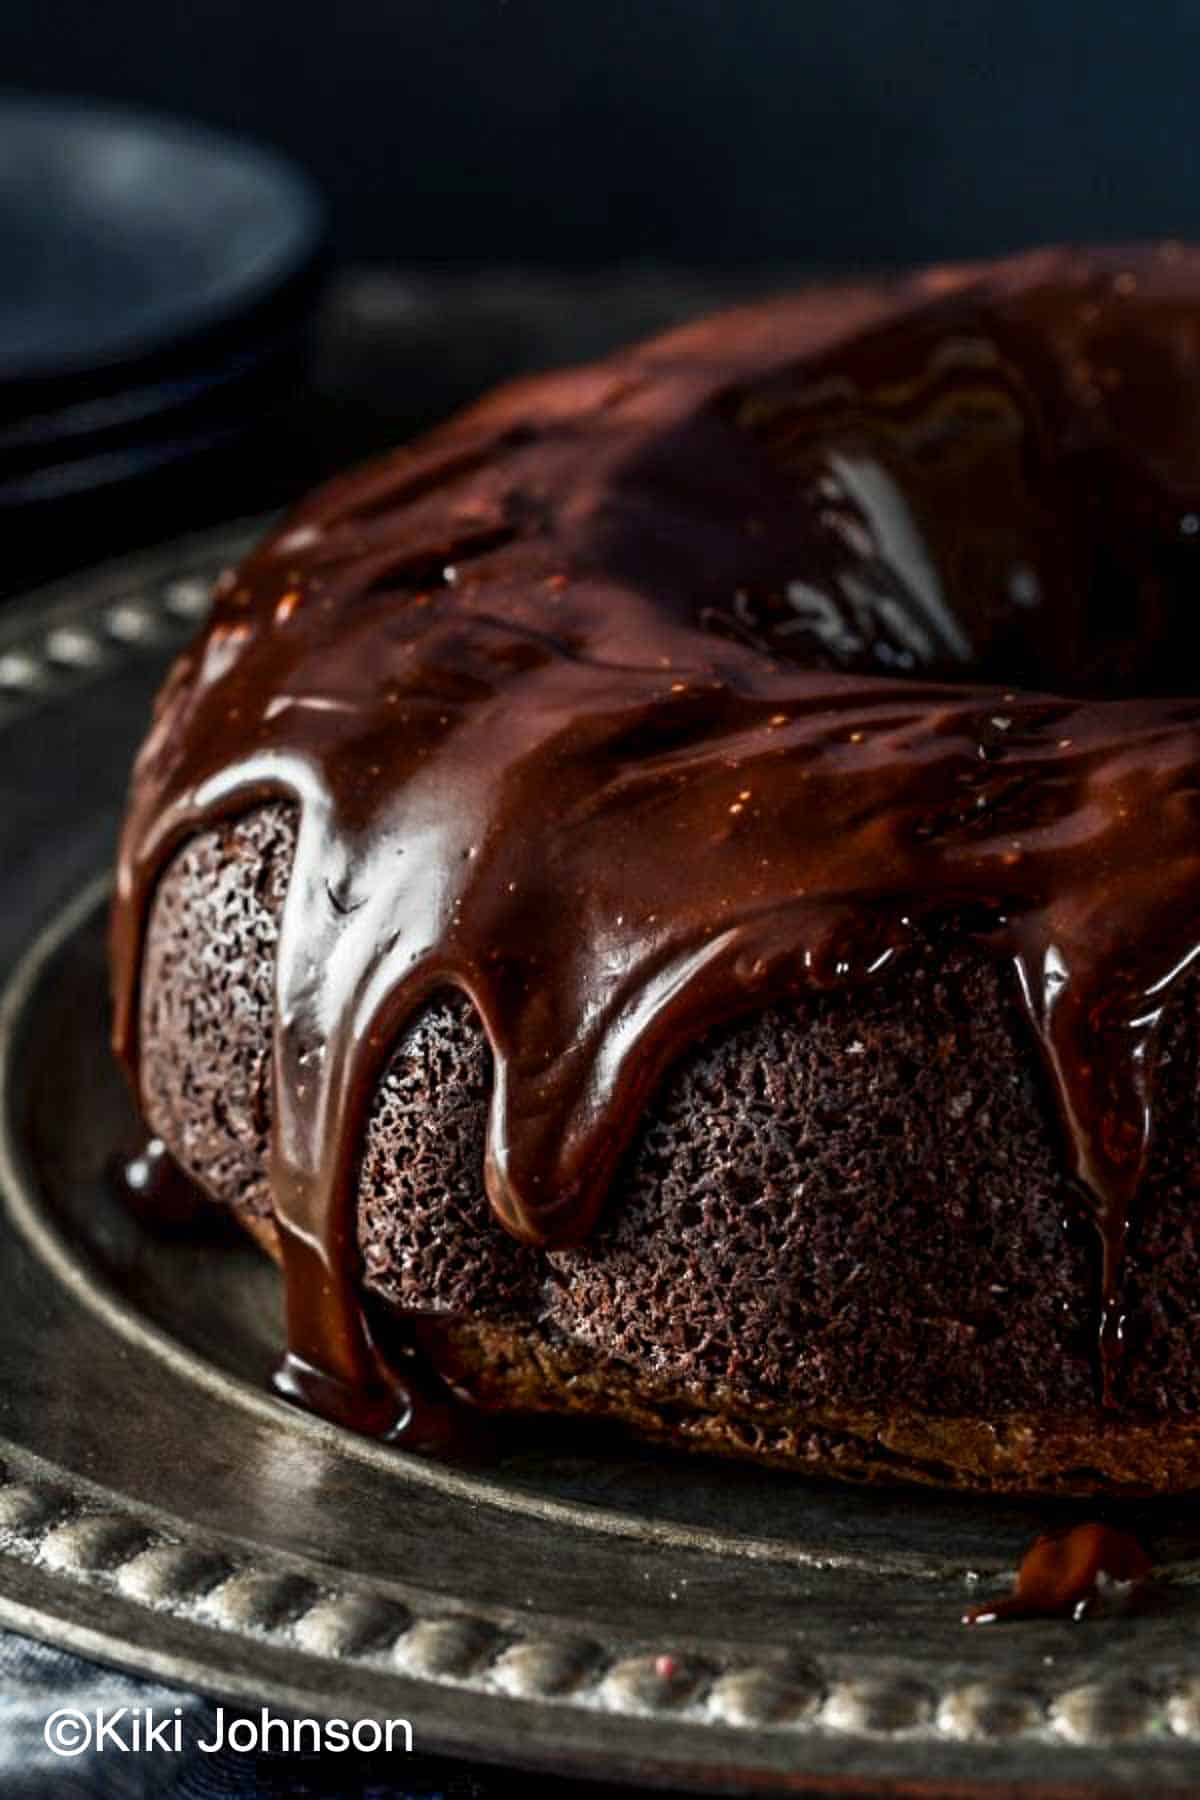 Bourbon Whiskey chocolate cake with whisky drizzle and chocolat frosting on a cake platter